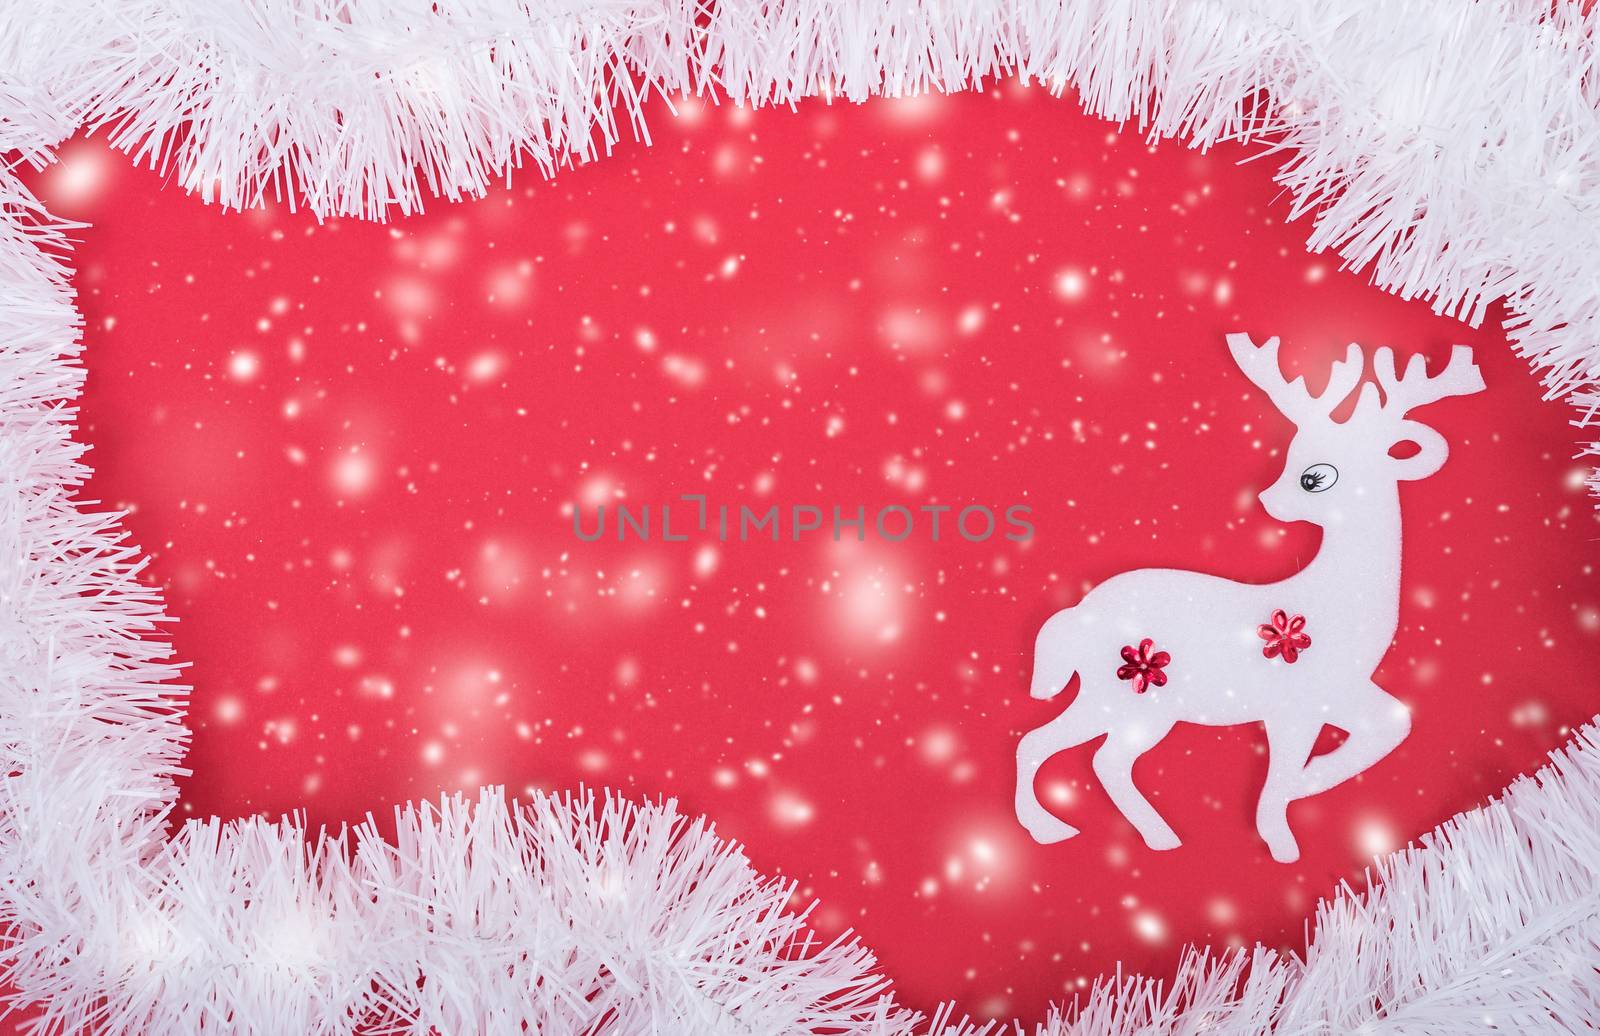 Reindeer decoration in christmas holiday by Sorapop